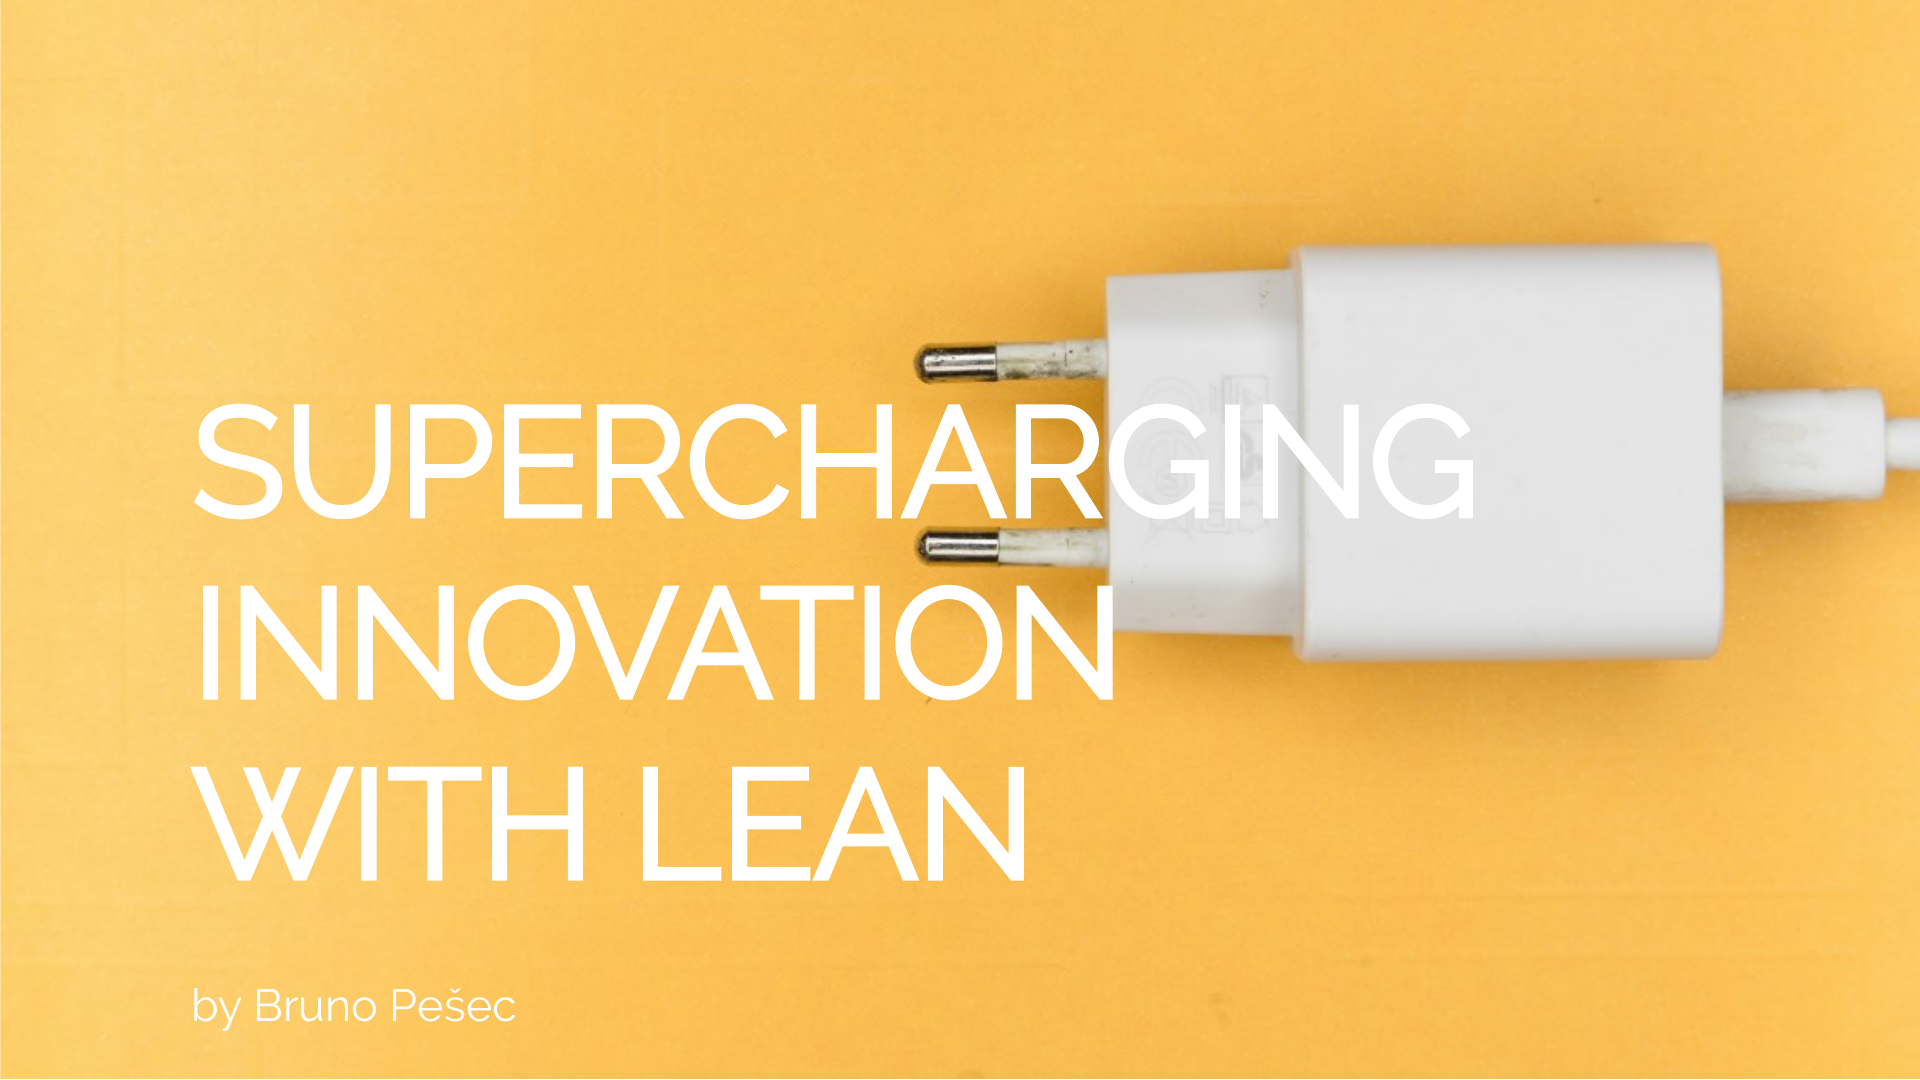 The value factory: Five ways to supercharge your innovation process using lean practices